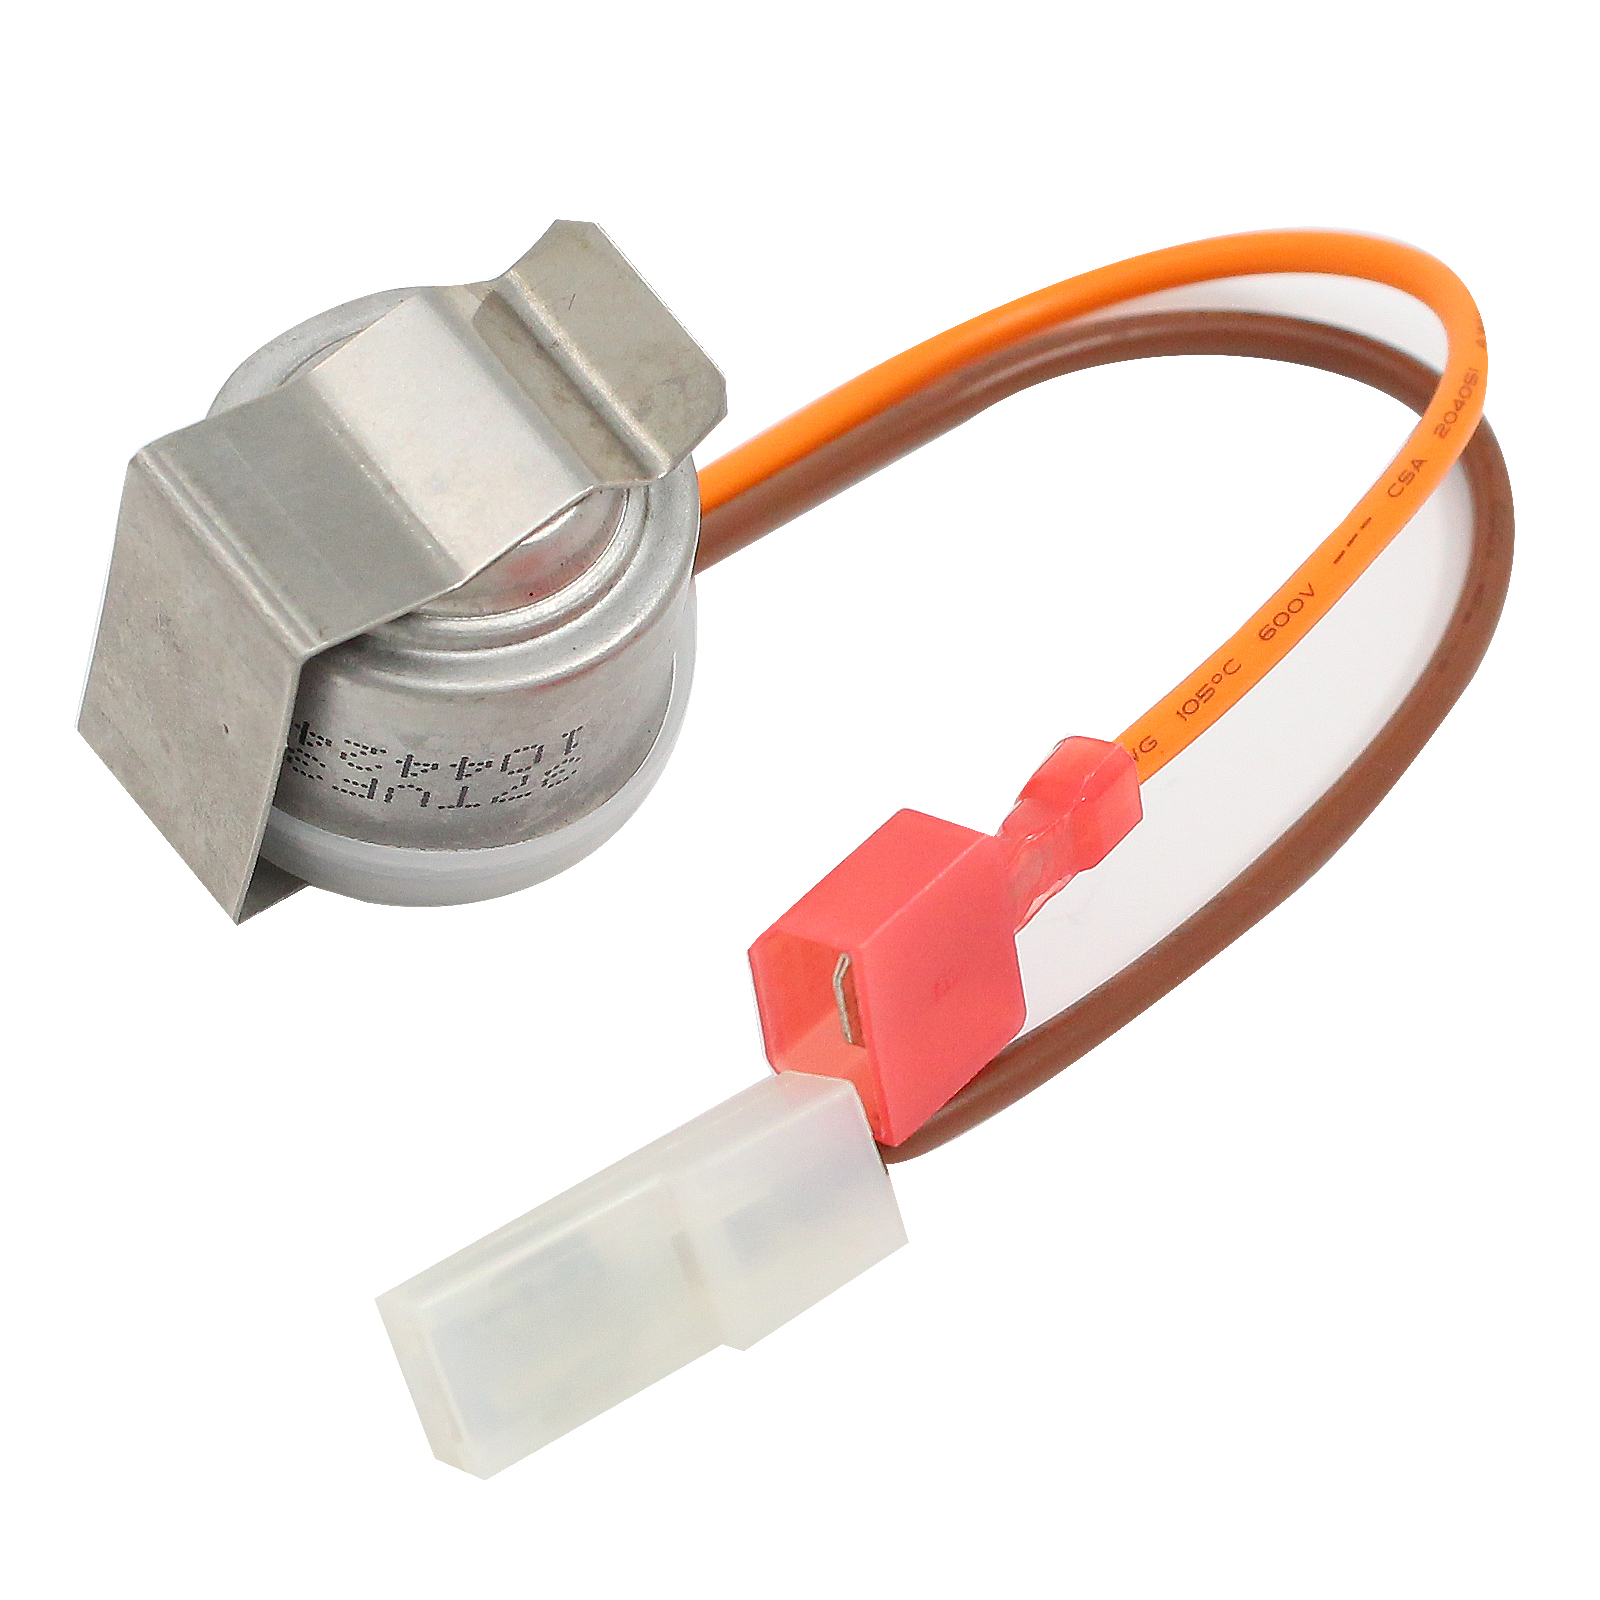 WP10442411 Refrigerator Defrost Thermostat Replacement for Amana BR22VE (P1325015W B) Refrigerator - Compatible with 10442411 Defrost Thermostat - image 2 of 4